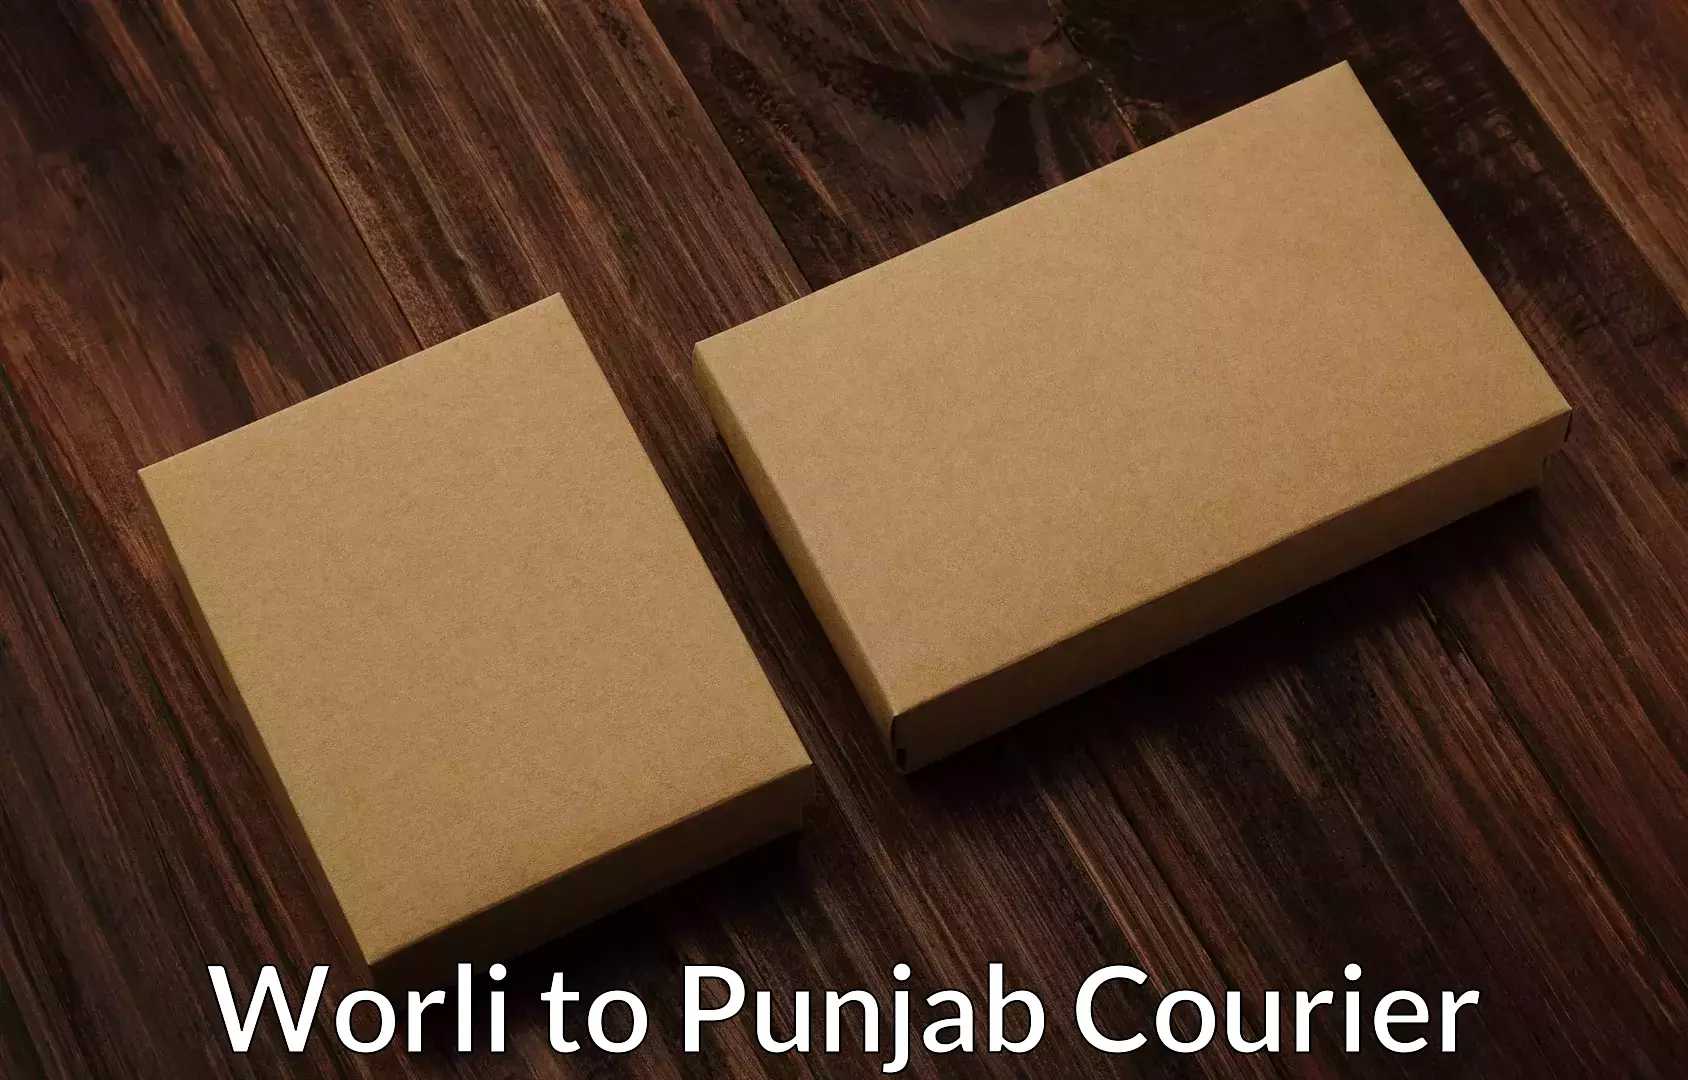 Affordable home movers Worli to Punjab